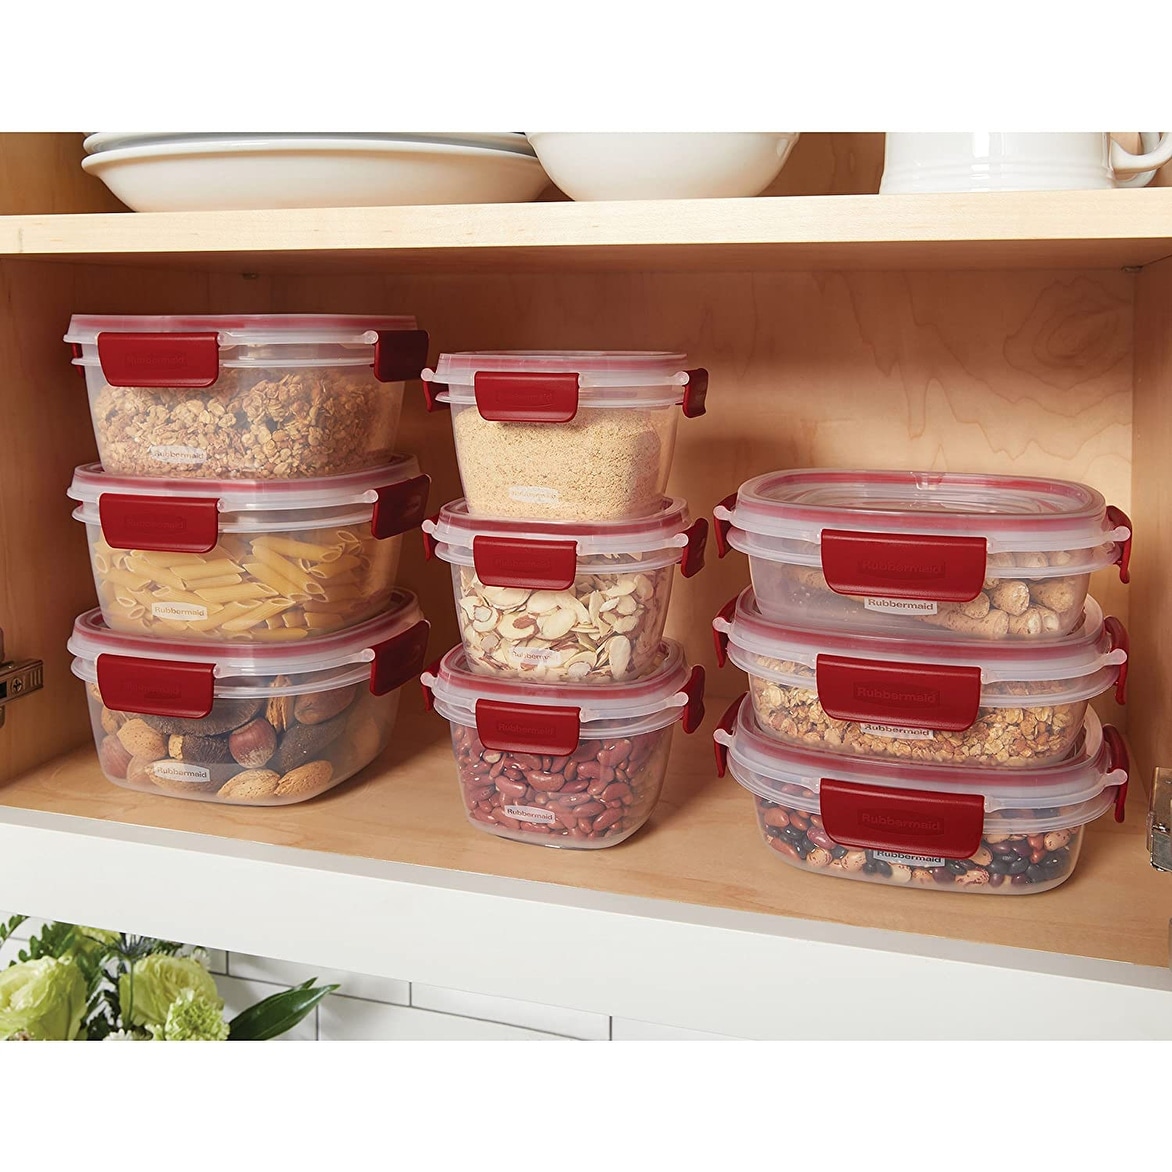 https://ak1.ostkcdn.com/images/products/is/images/direct/5460959f58a4886d2aa66fbe0942a280e16de42f/Rubbermaid-Easy-Find-Lids-Tabs-Food-Storage-Container%2C-16-Piece-Set%2C-Clear-with-Red-Tabs.jpg